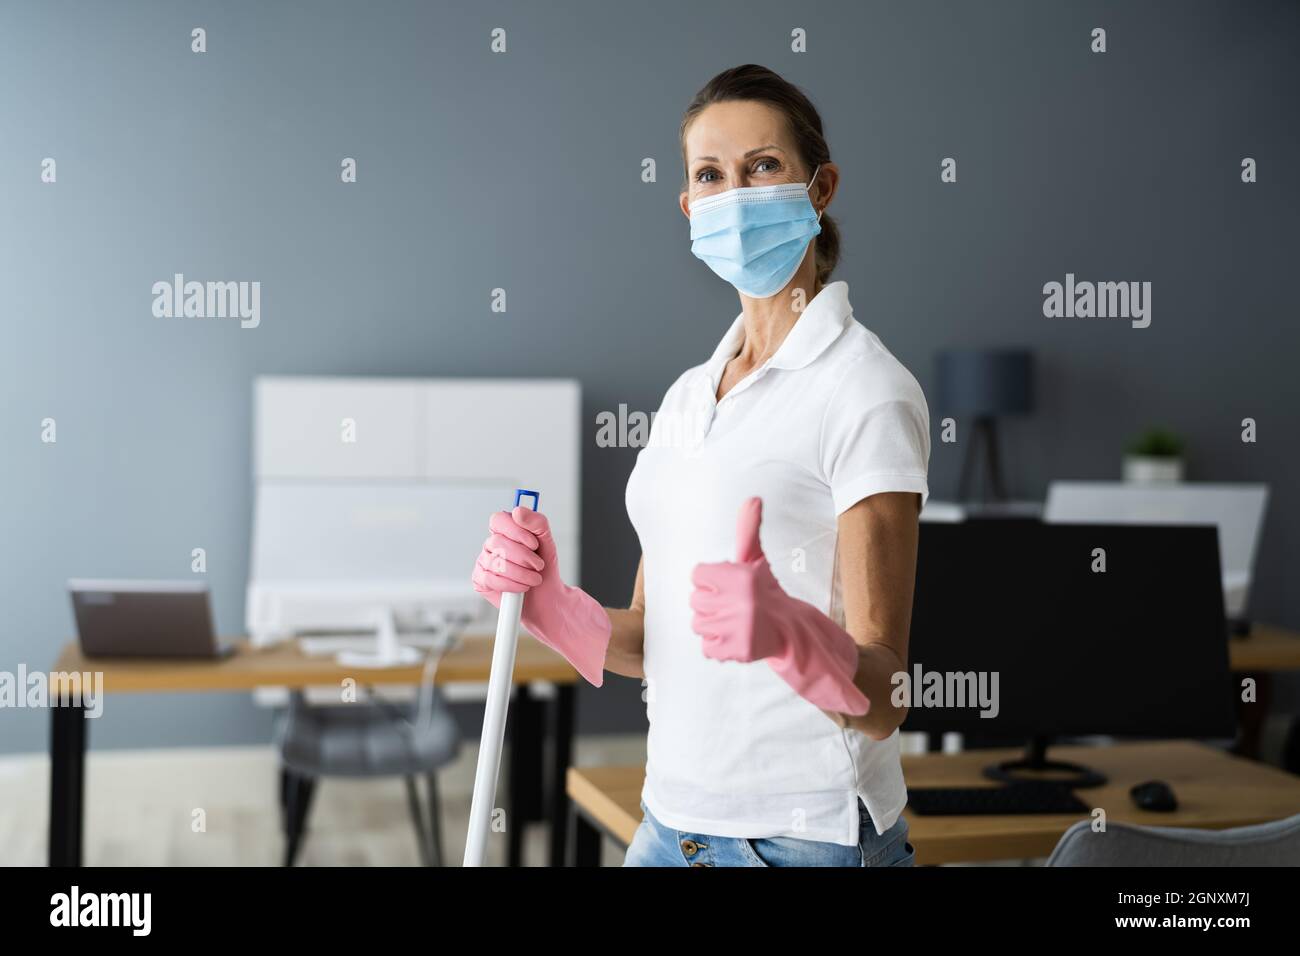 Female Janitor Mopping Floor In Face Mask In Office Stock Photo